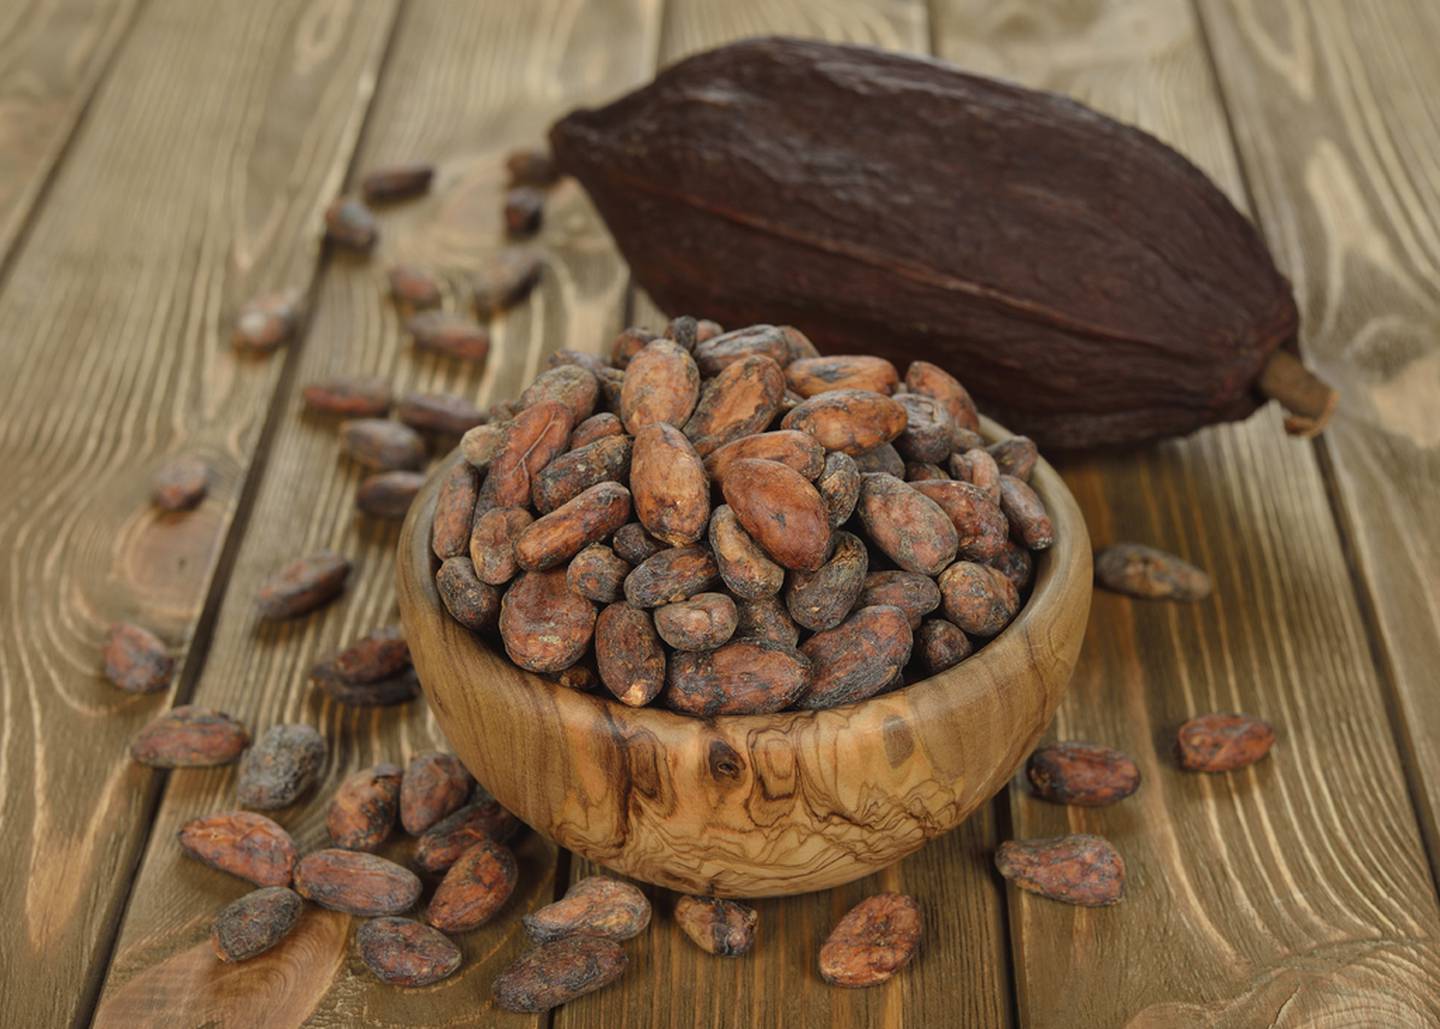 It can take a year for a cocoa tree to produce enough cocoa beans to make 225 grams of chocolate. iStockphoto.com